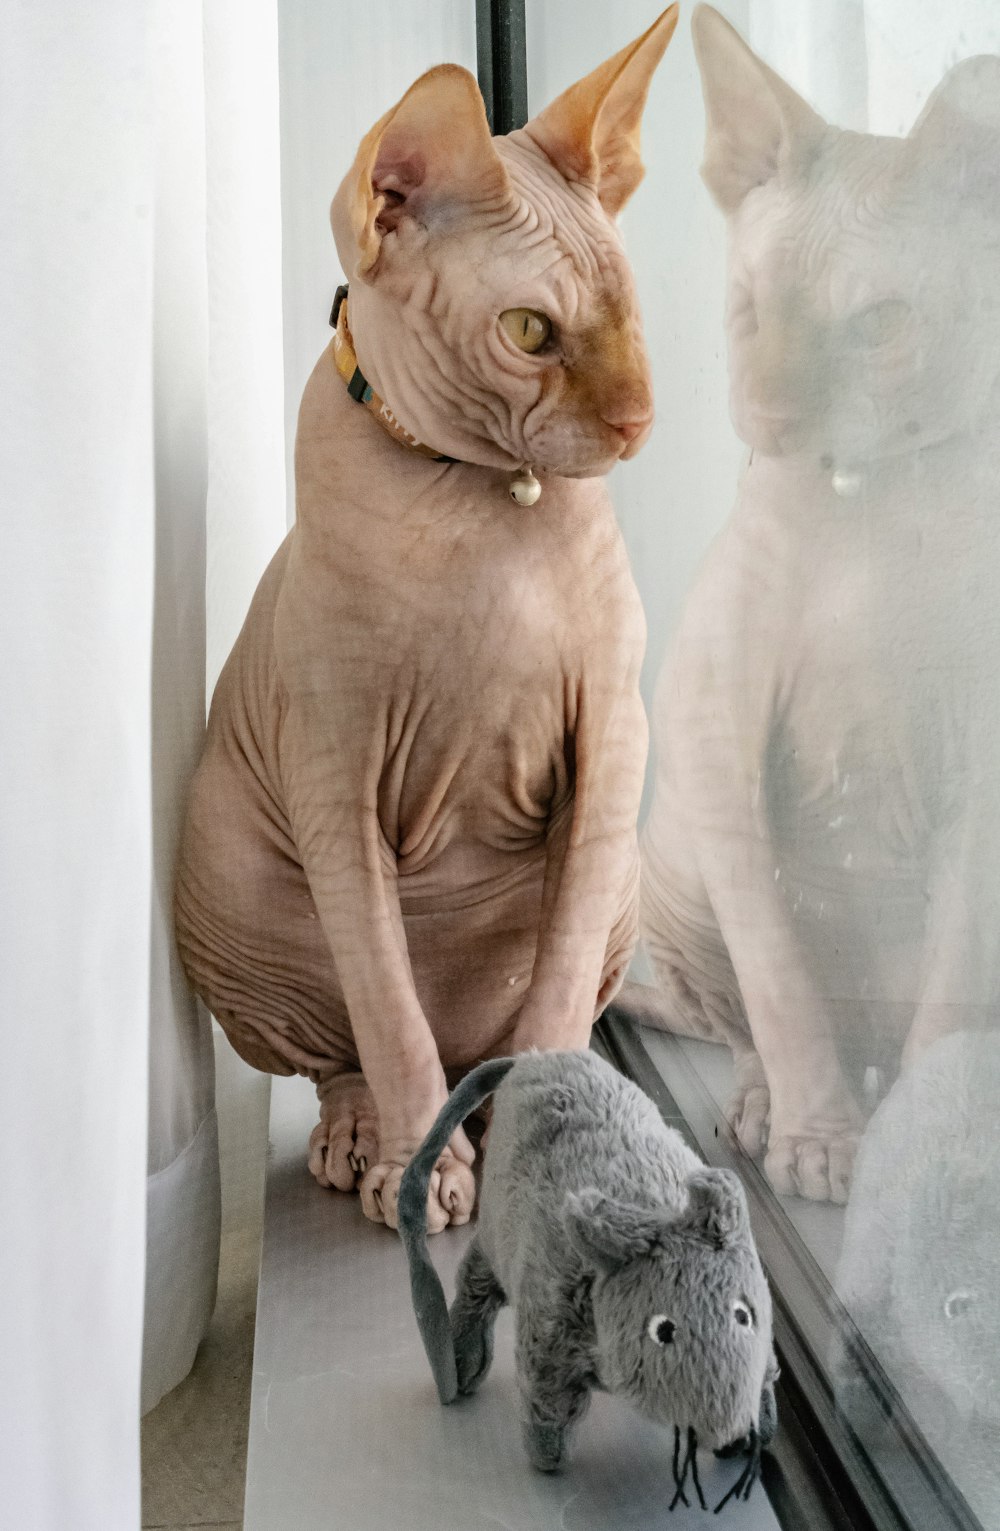 Sphinx cat sits beside glass window with gray rat plush toy